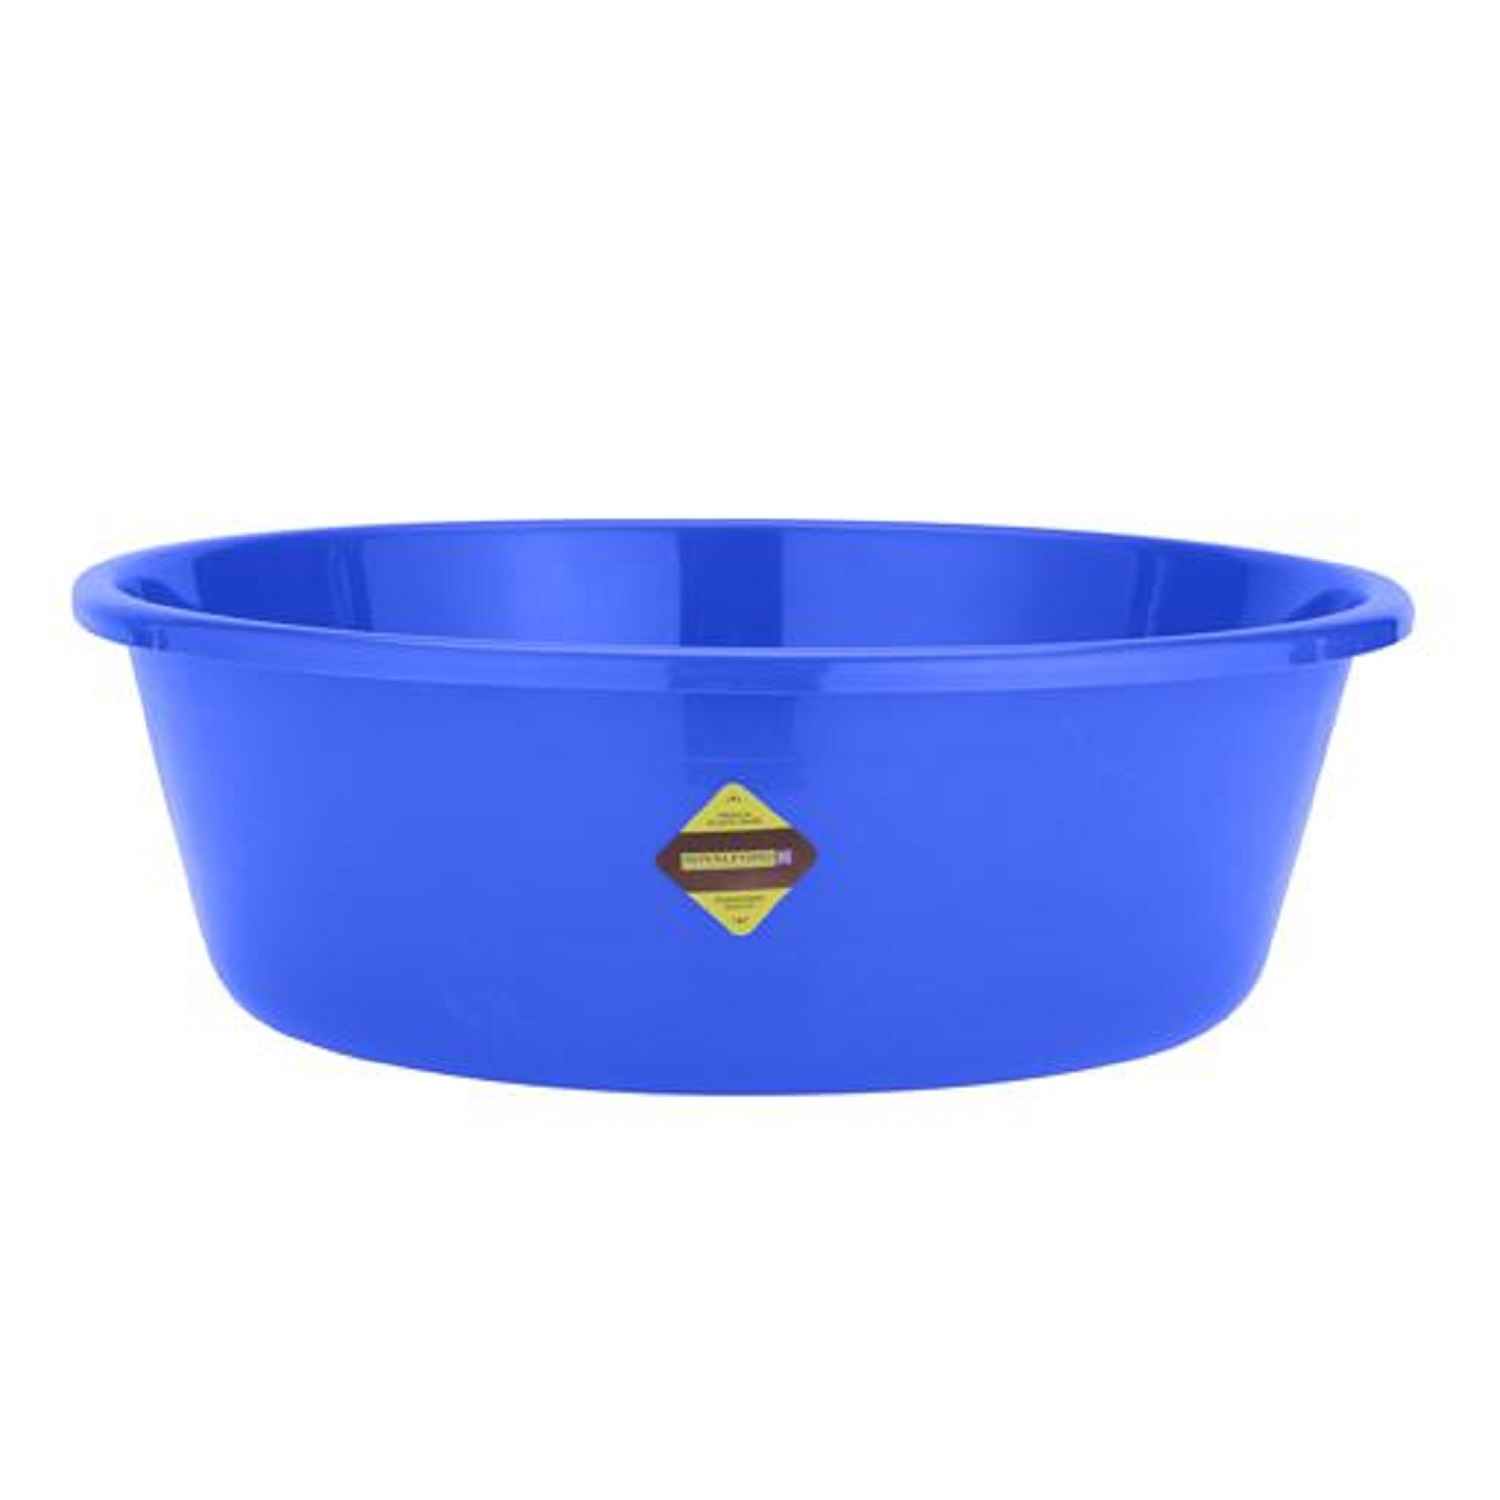 Royalford Tub With Ring - Plastic - Blue - 17 LITER